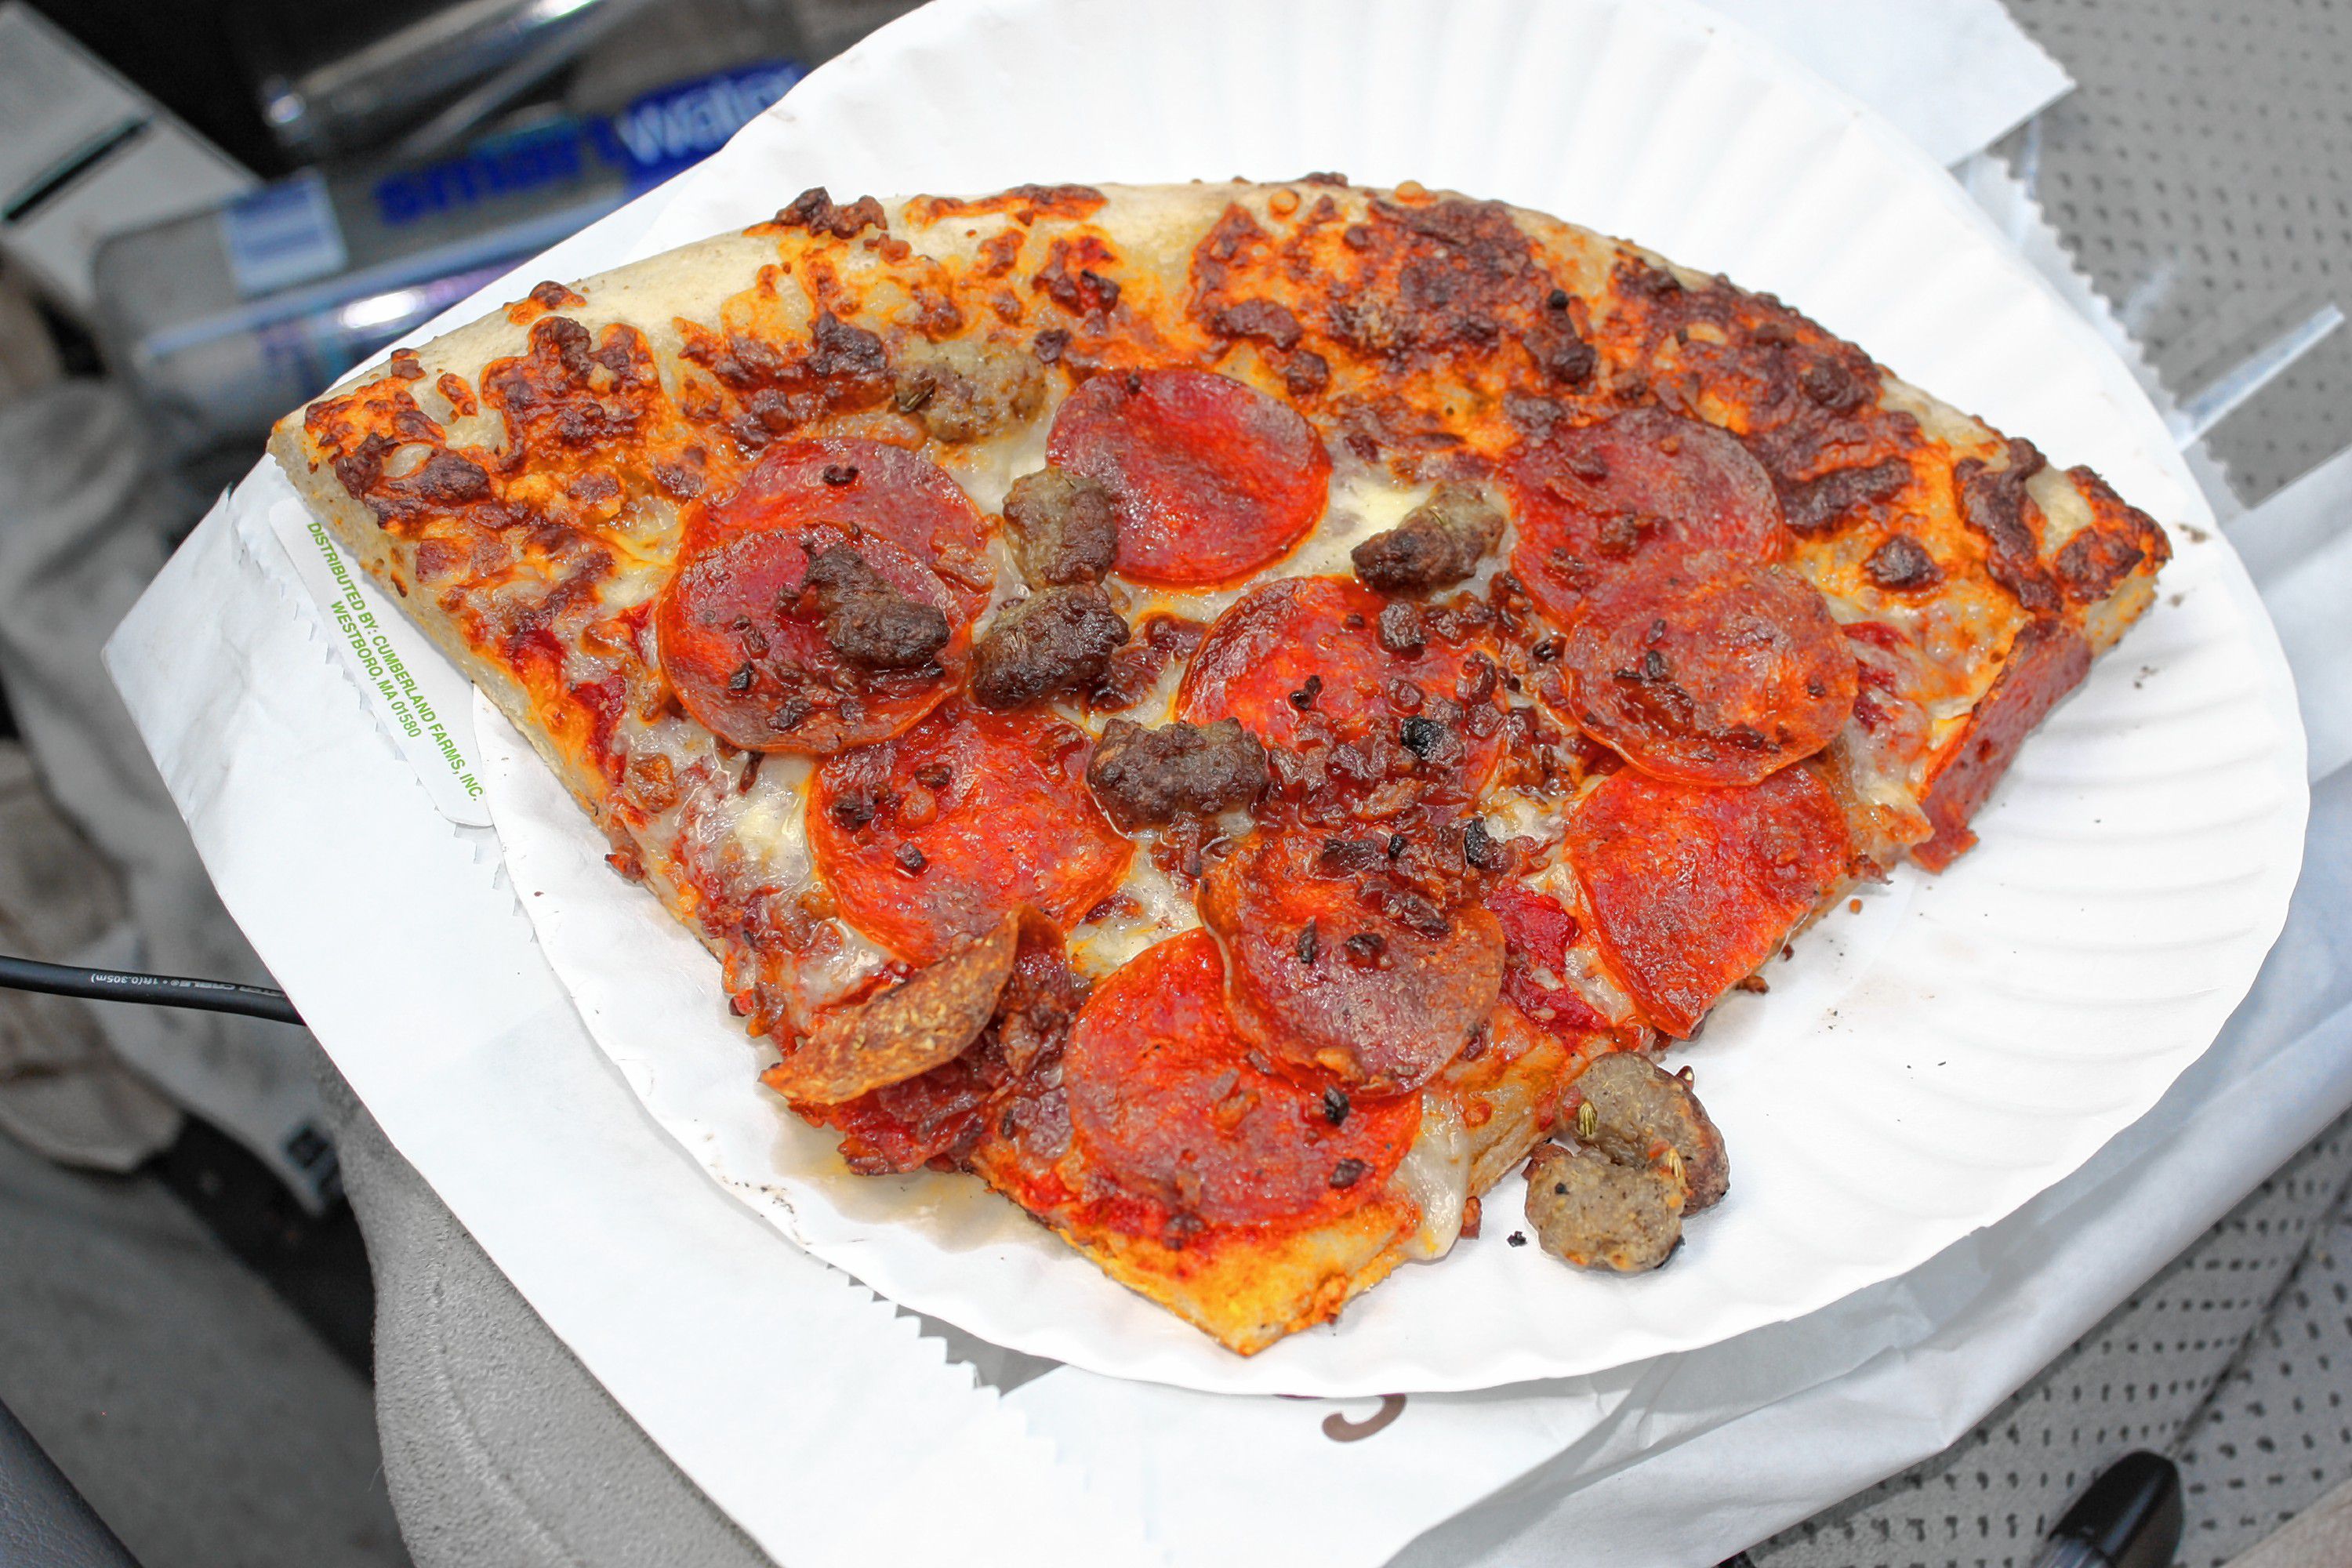 Let’s take a nuanced look at gas station pizza in Concord The Concord